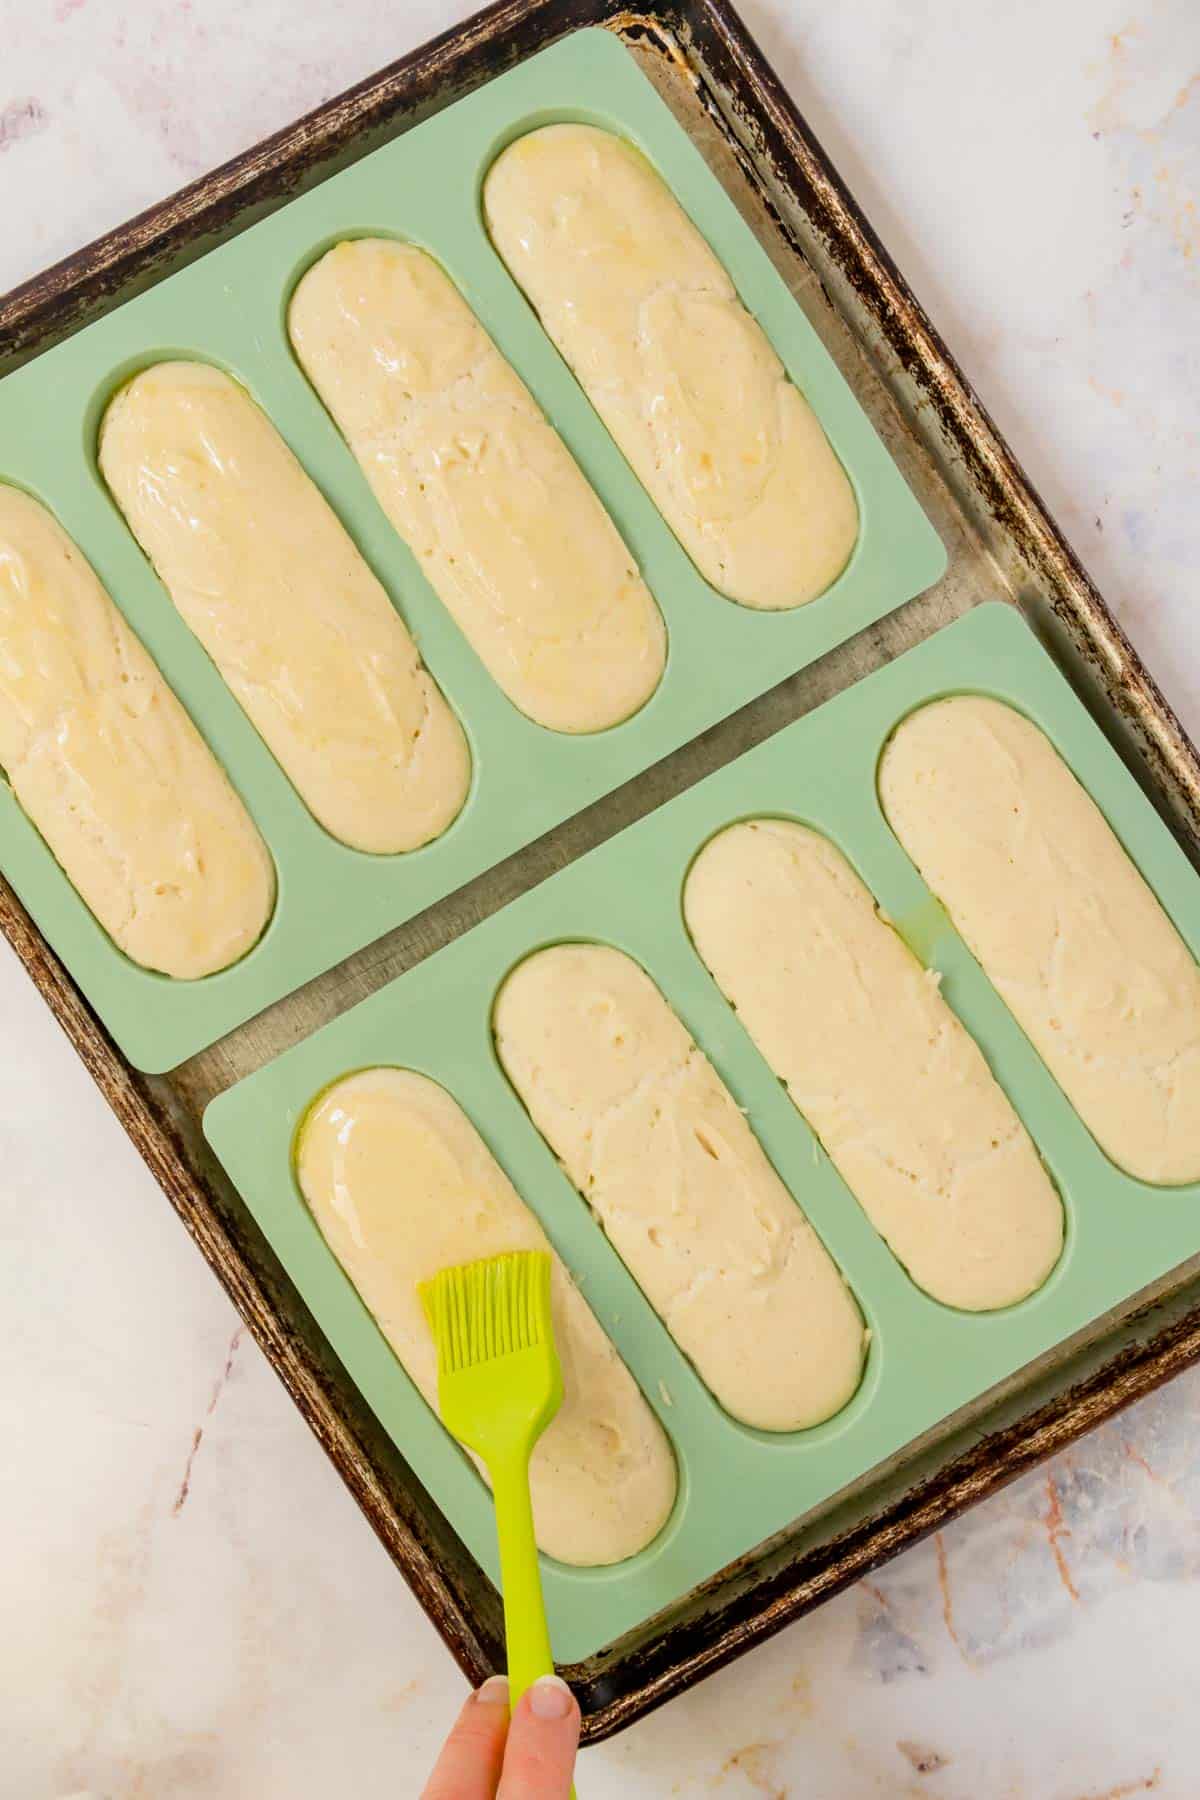 Butter is brushed overtop hot dog bun dough in a green silicone hot dog mold.